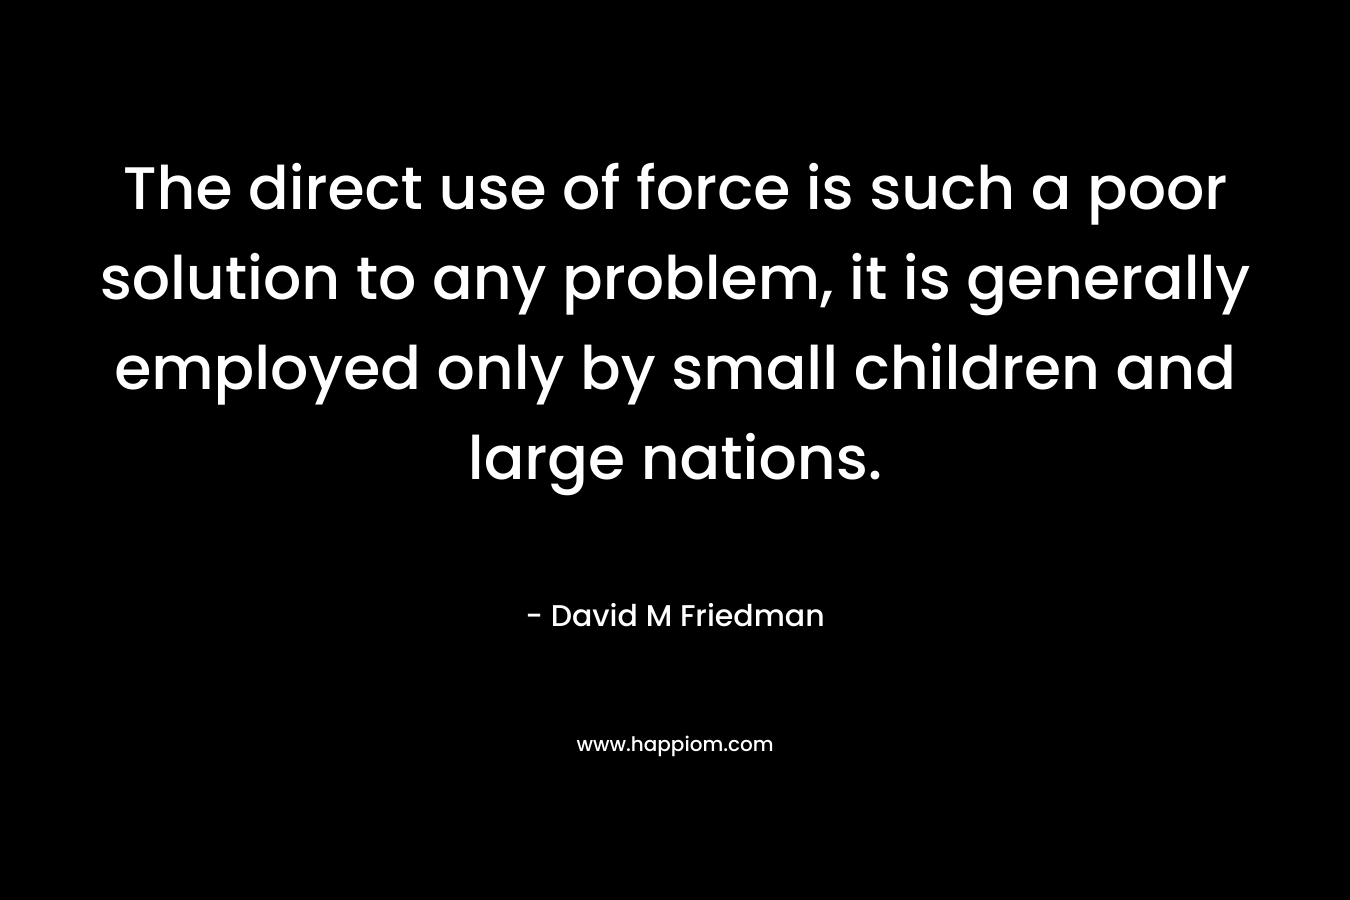 The direct use of force is such a poor solution to any problem, it is generally employed only by small children and large nations.